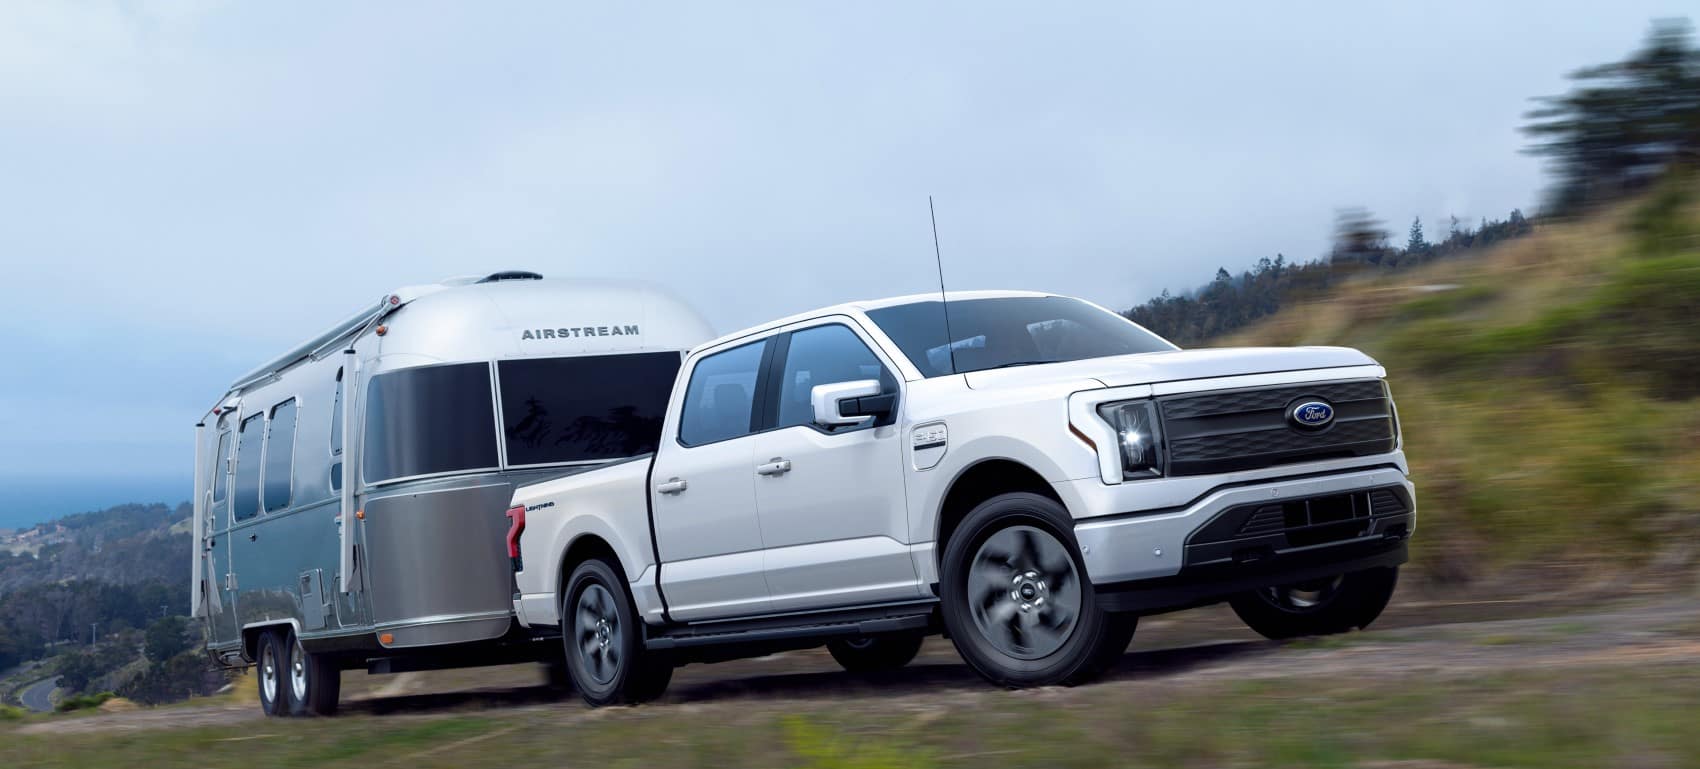 How capable is the Ford F-150 Lightning?